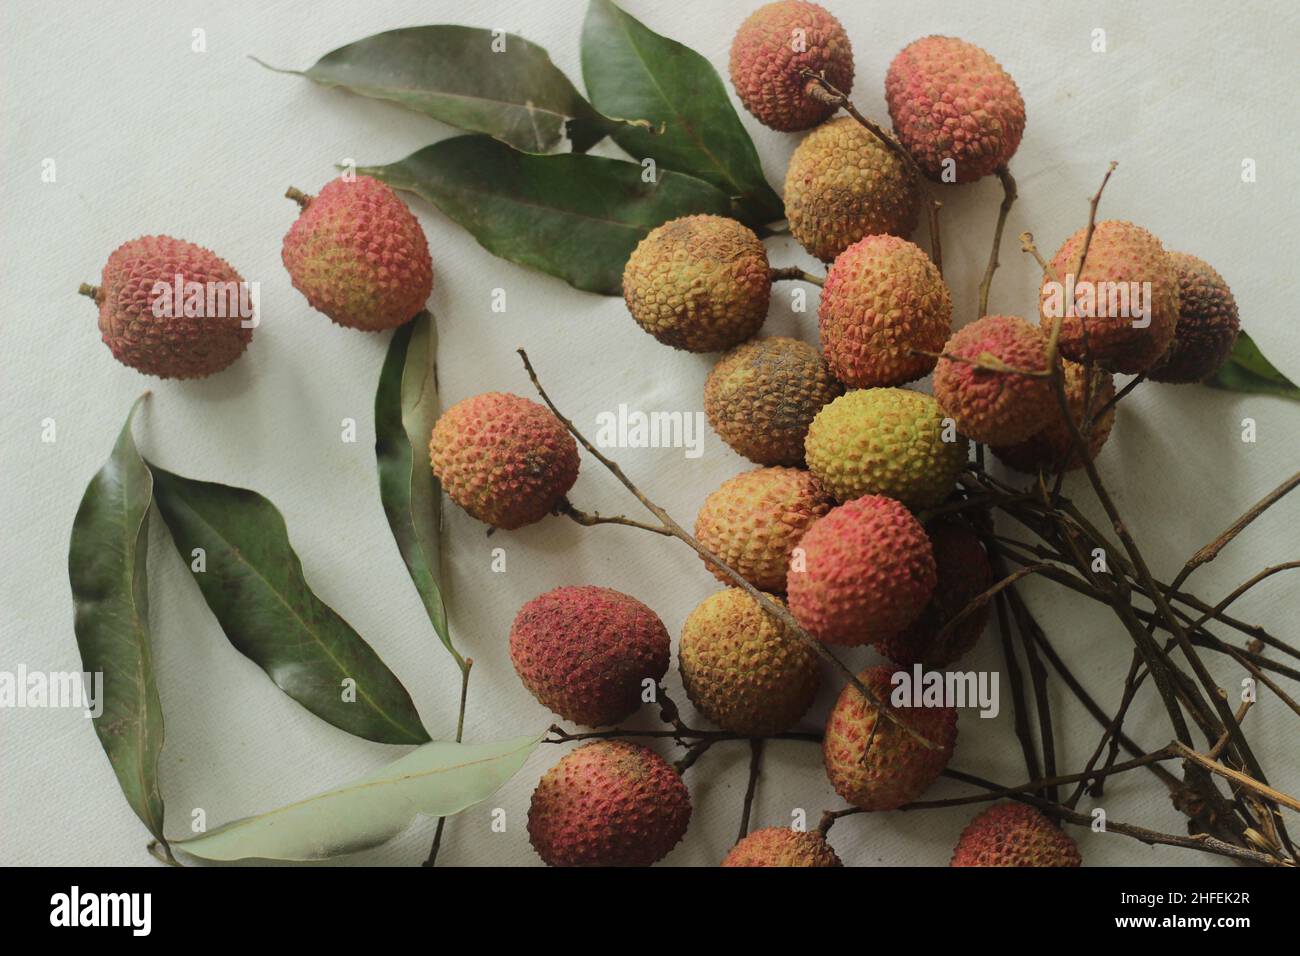 Lychee fruits shot on white background. Litchi chinensis also spelled litchi or lichi, is an evergreen tree of the soapberry or Sapindaceae family, gr Stock Photo